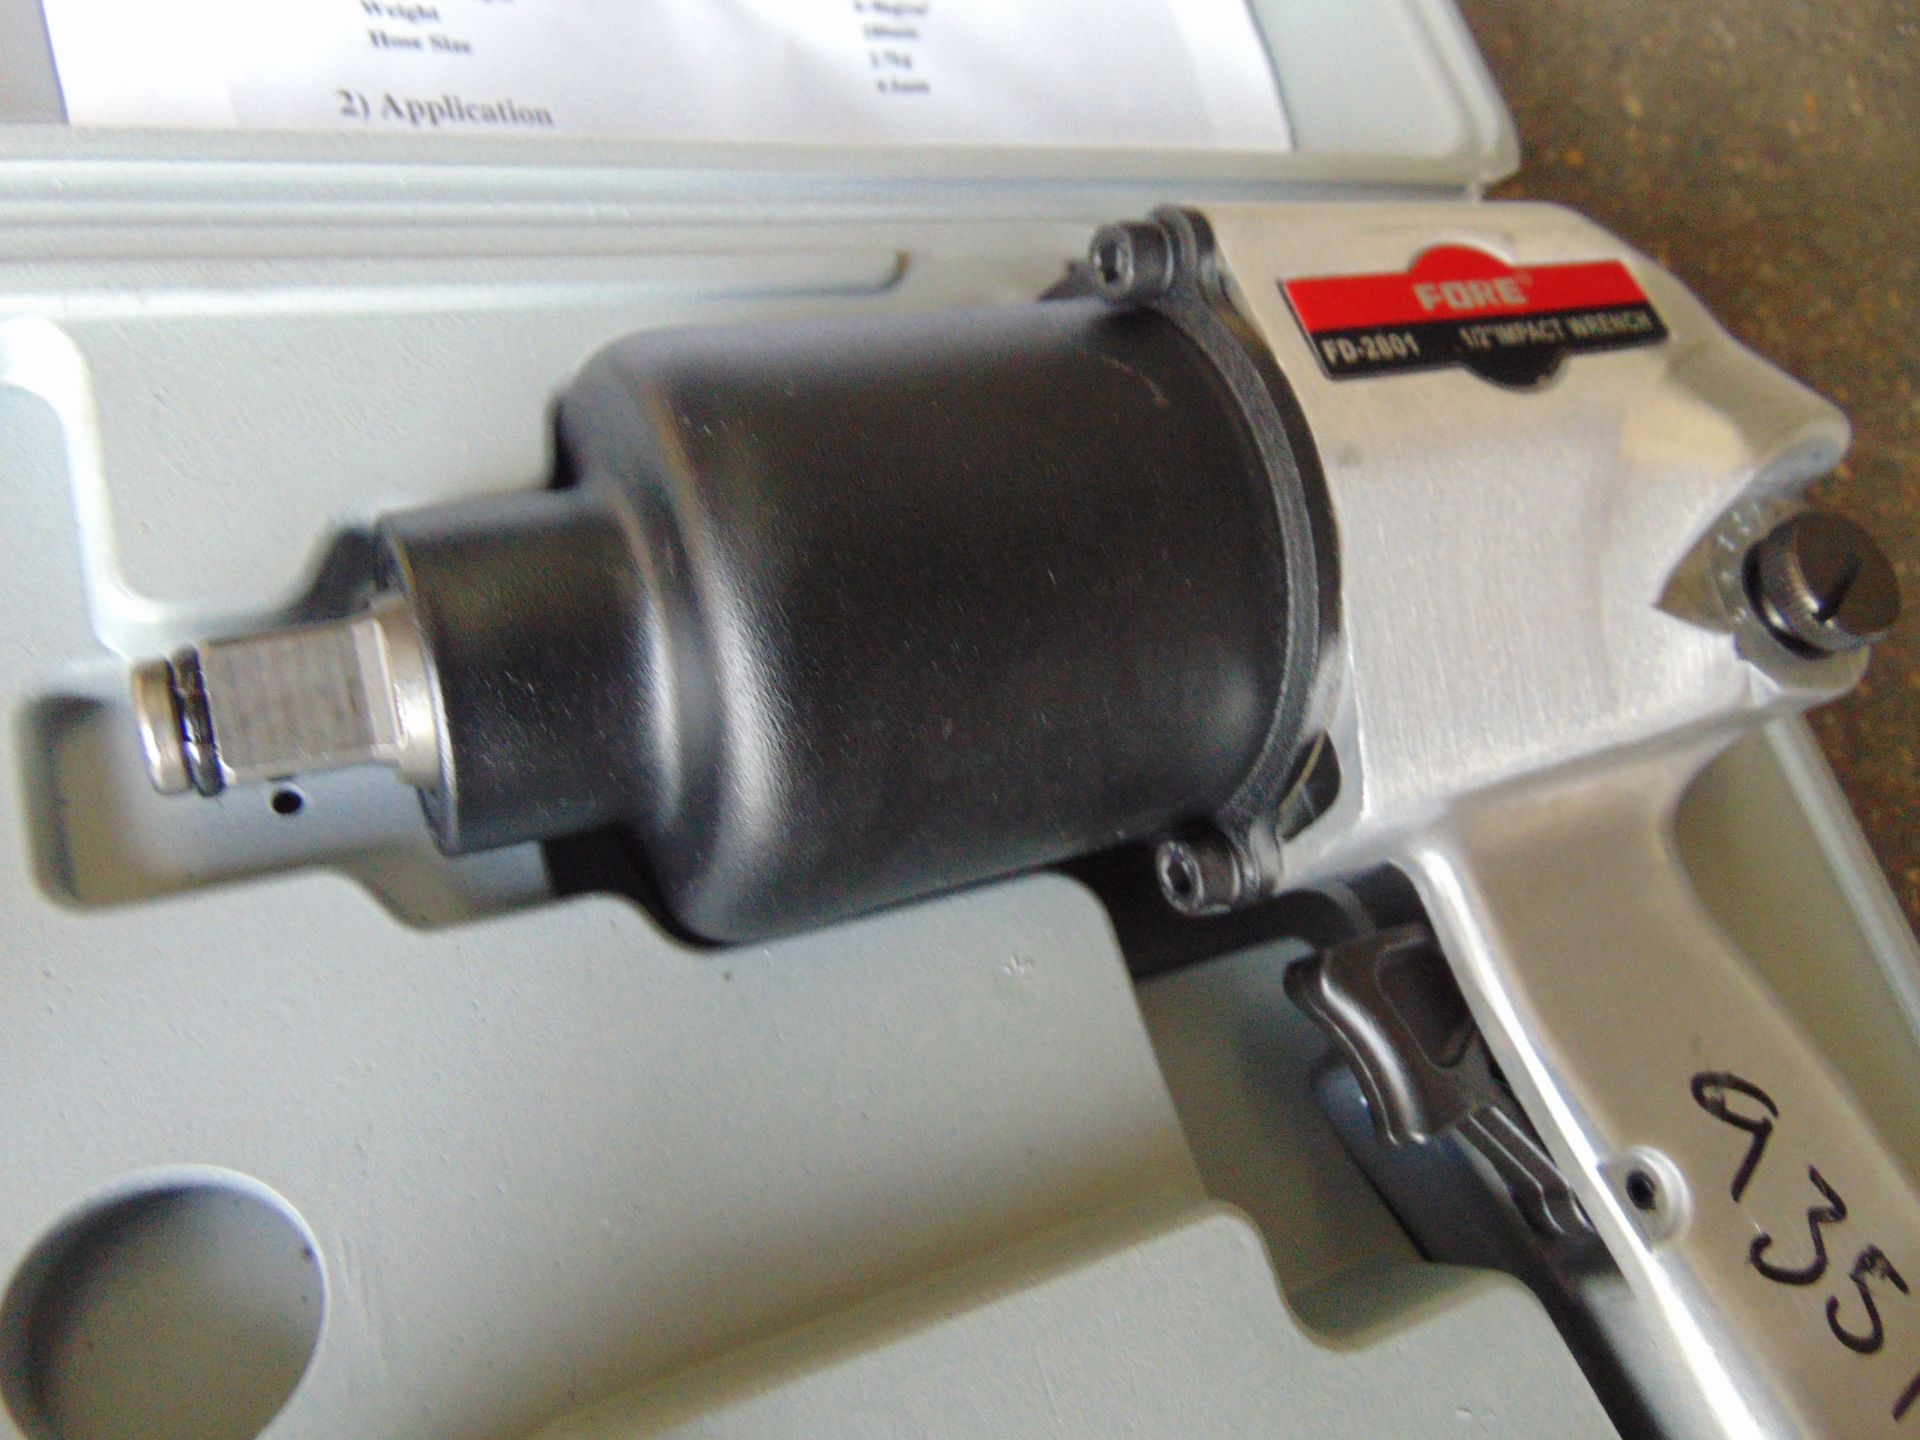 New and Unused Fore 1/2" Impact Wrench - Image 2 of 7